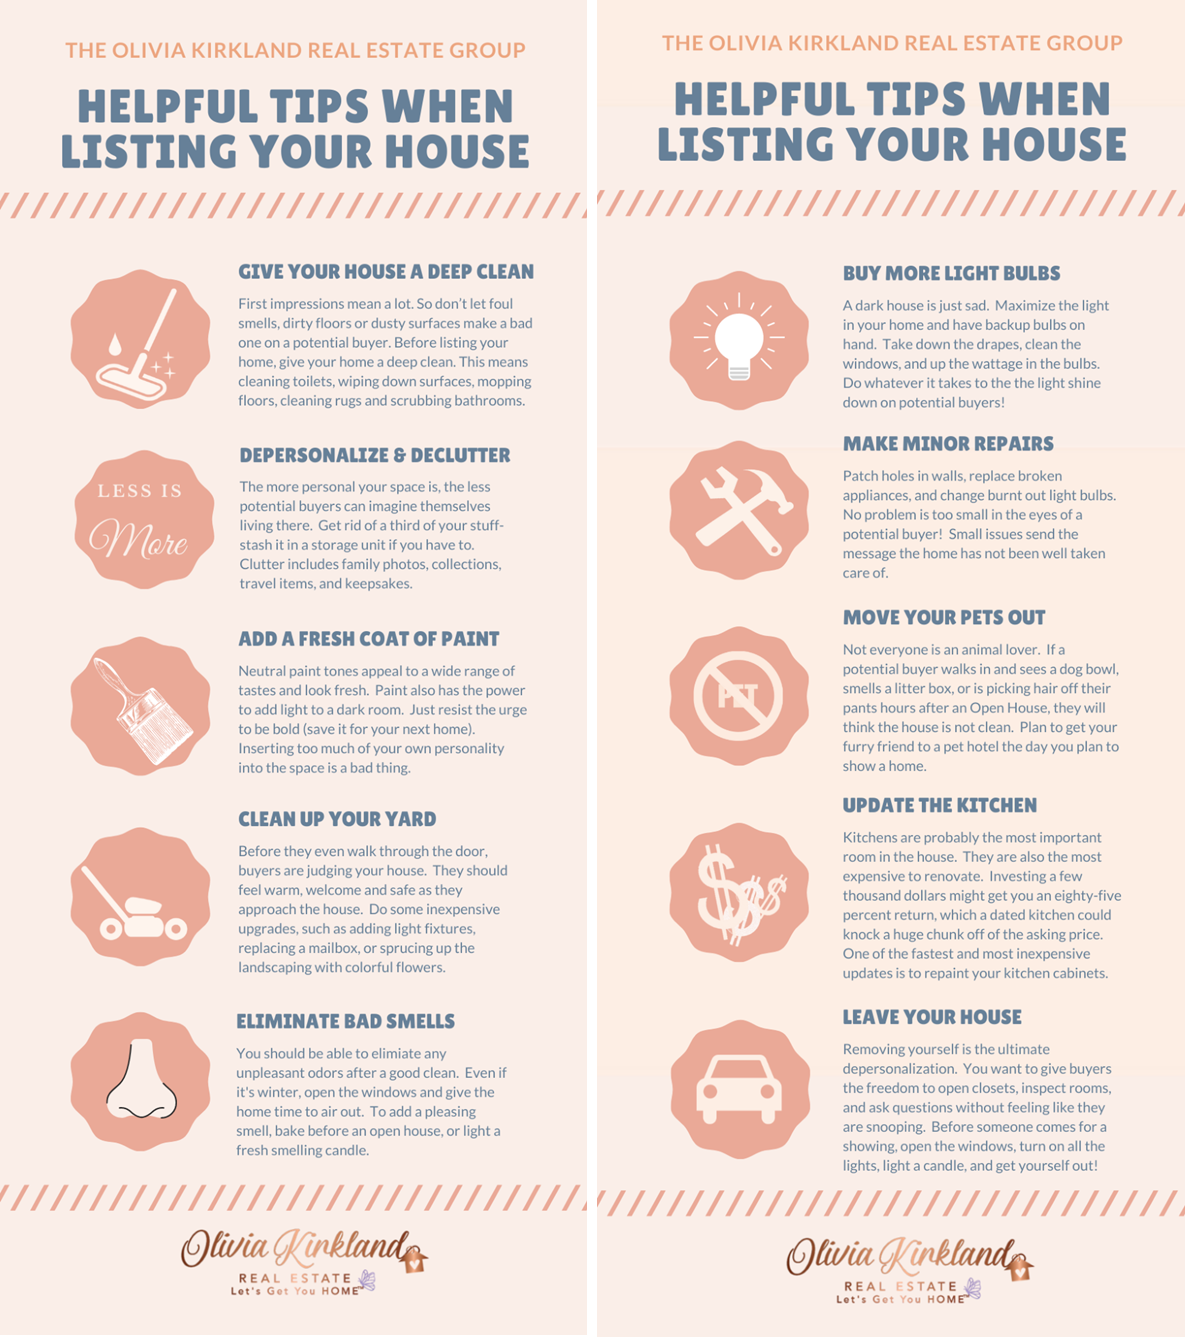 Helpful Tips when Listing your house